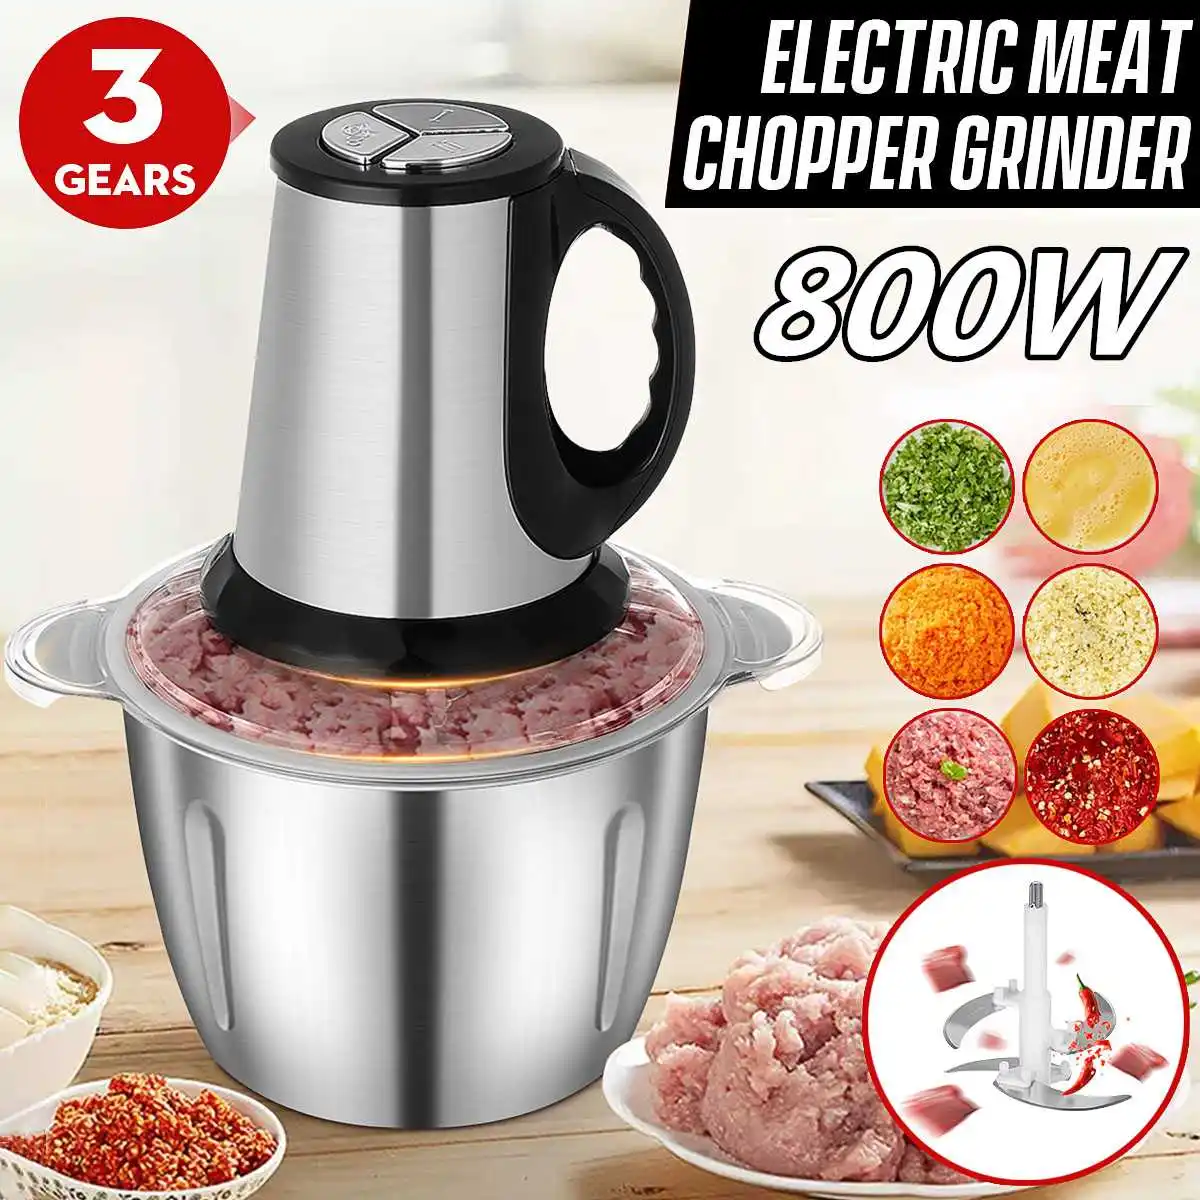 3Speed Meat Grinders 3/2L Capacity Electric Mincer Chopper Stainless Steel/Glass Kitchen Food Processor Mixer blender Easy Clean